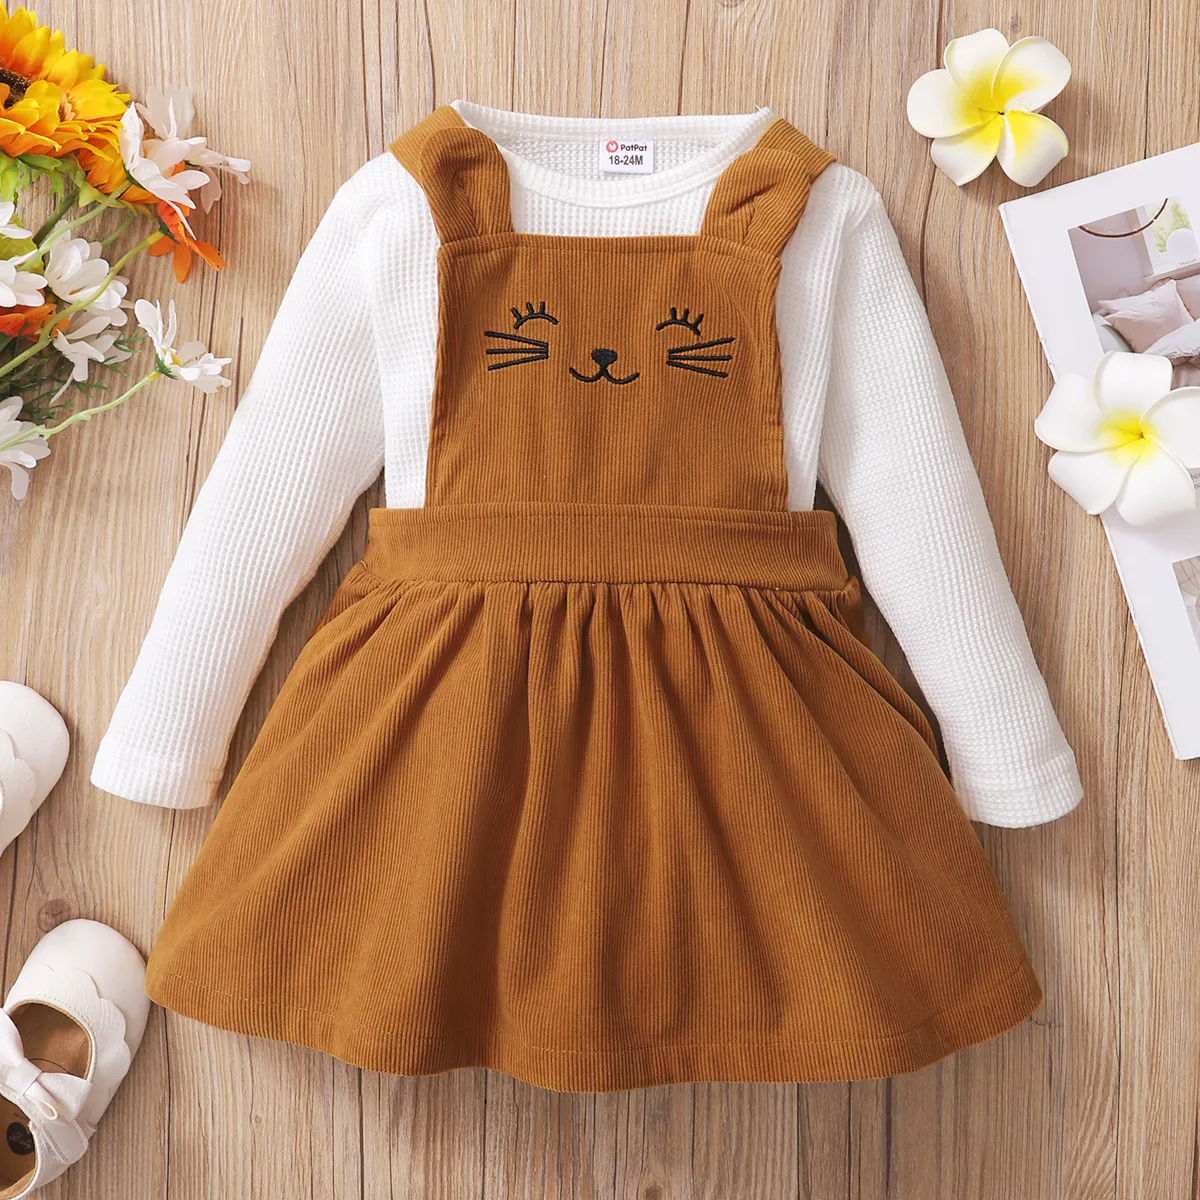 2-piece Toddler Girl Waffle White Top and Cat Embroidered Pink Overall Dress Set Brown big image 1